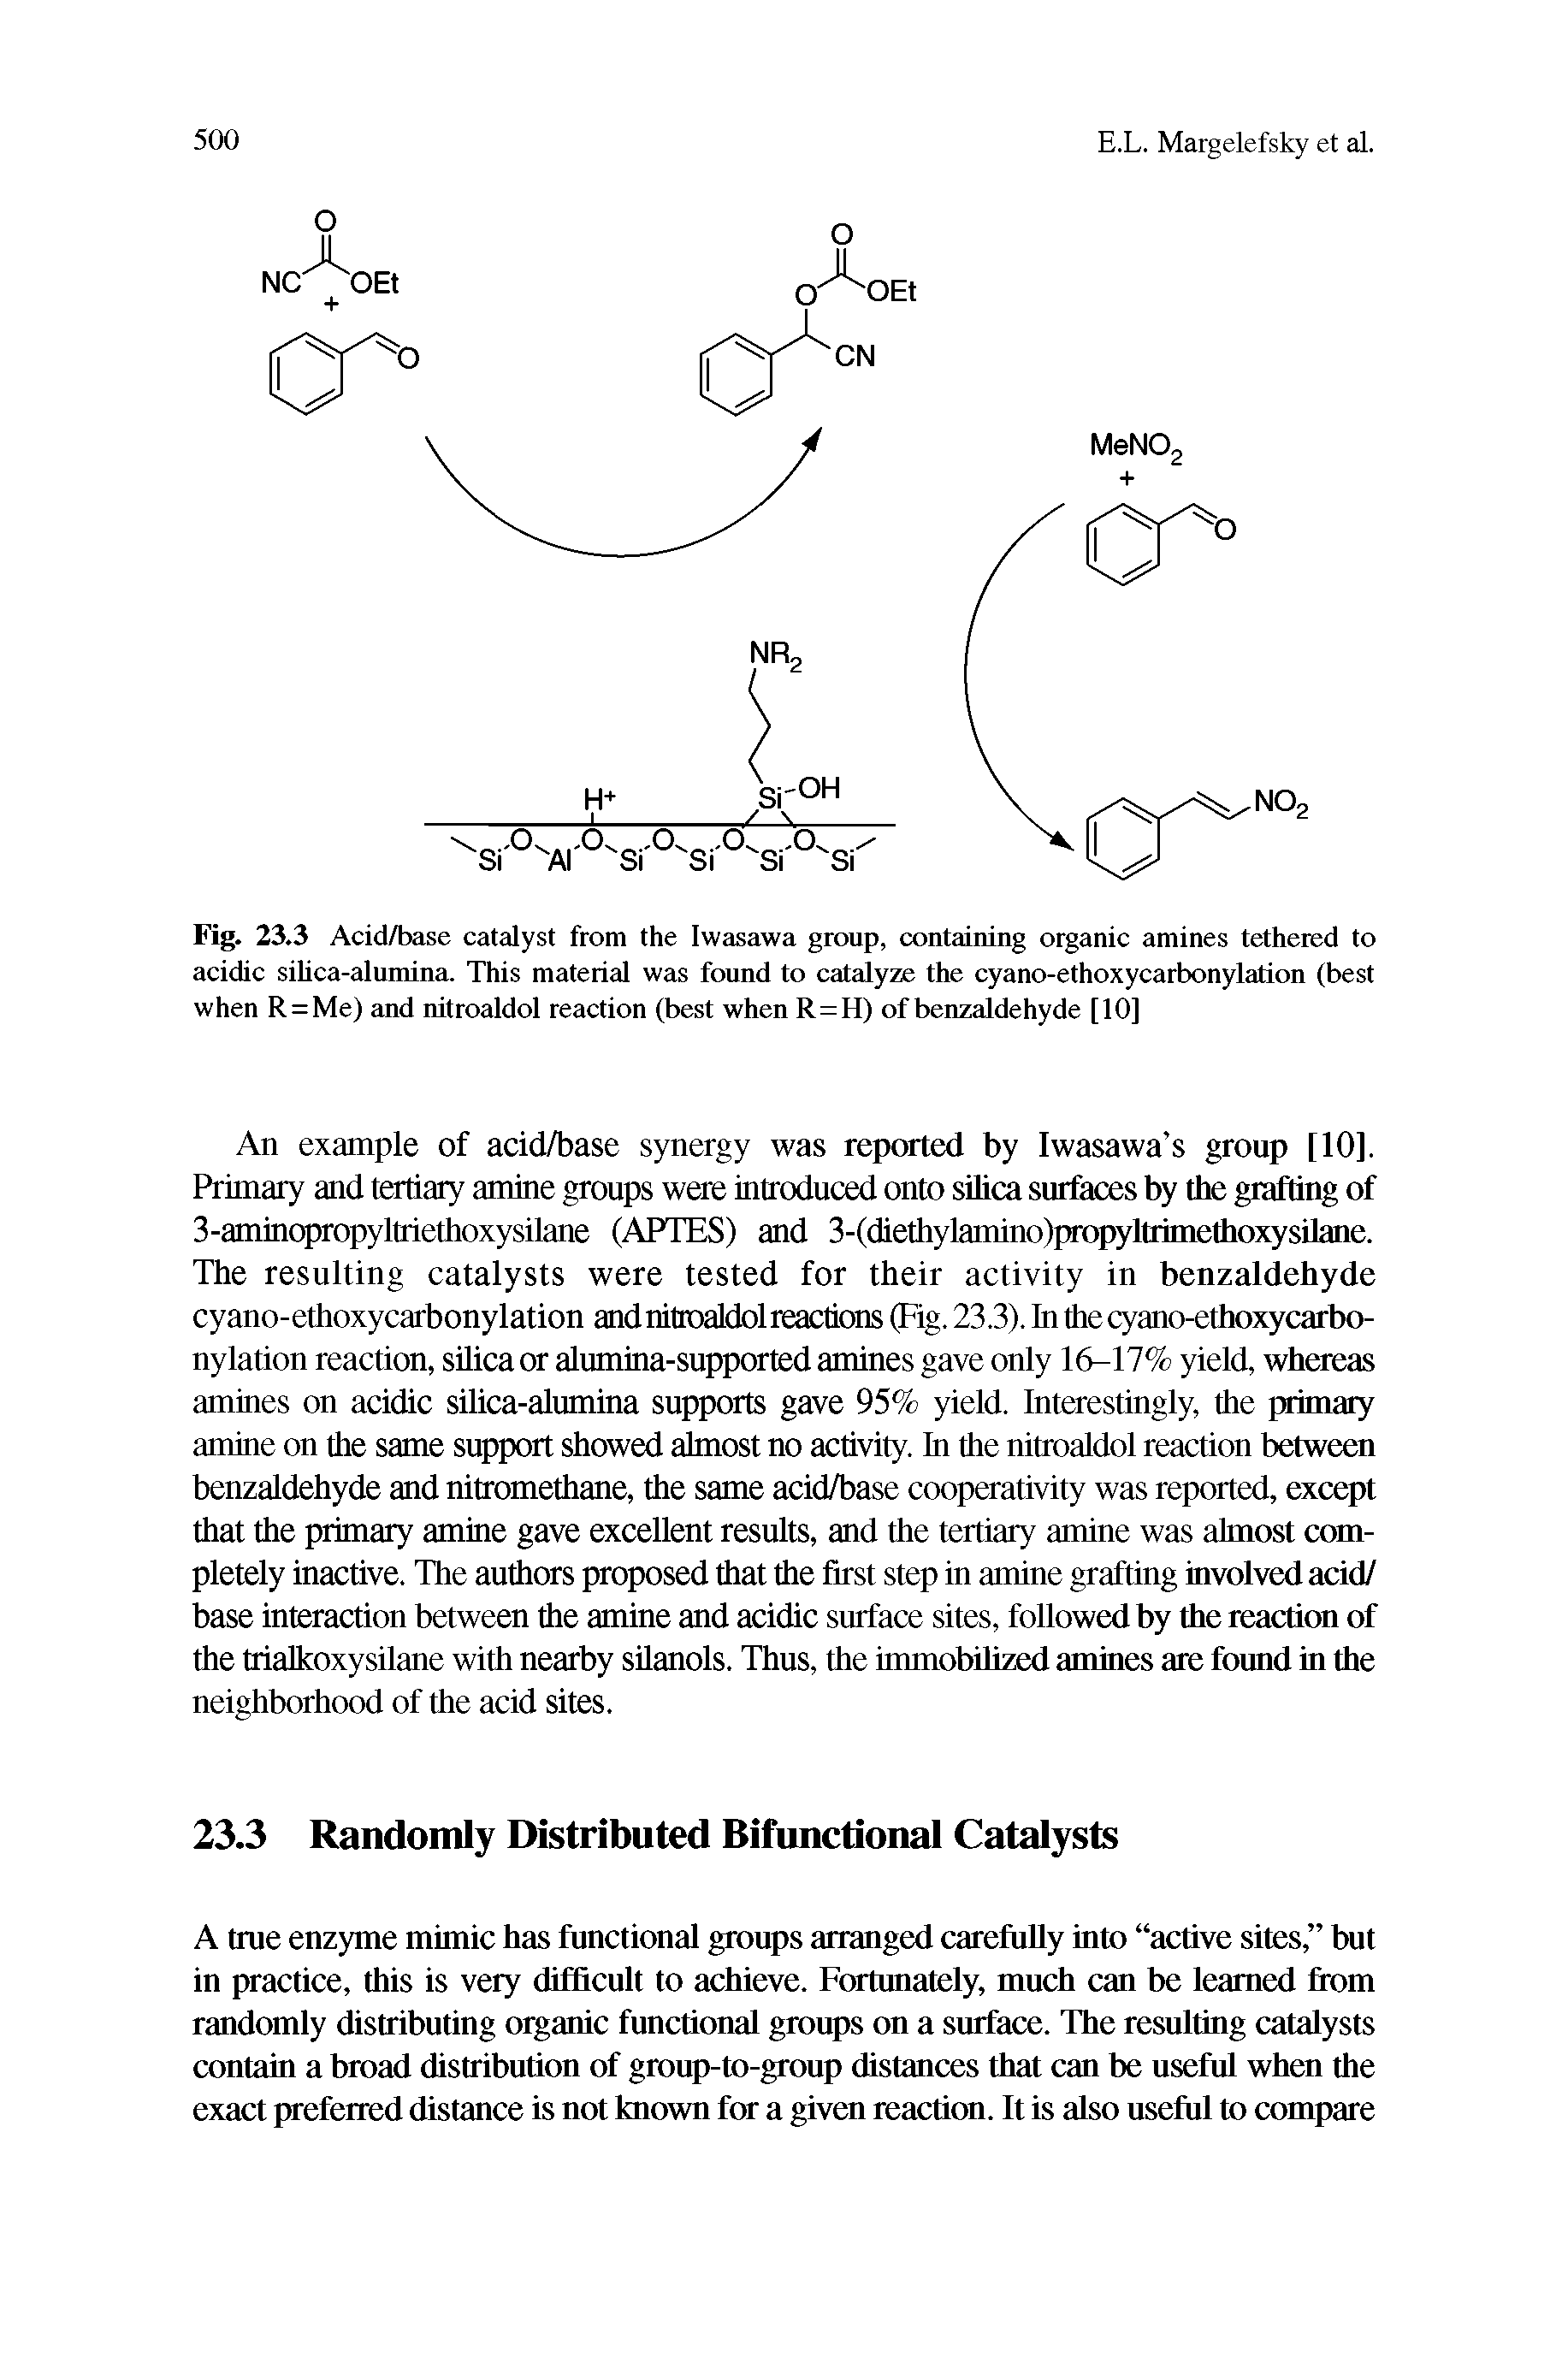 Fig. 23.3 Acid/base catalyst from the Iwasawa group, containing organic amines tethered to acidic sihca-alumina. This material was found to catalyze the cyano-ethoxycarbonylation (best when R = Me) and nitroaldol reaction (best when R=H) of benzaldehyde [10]...